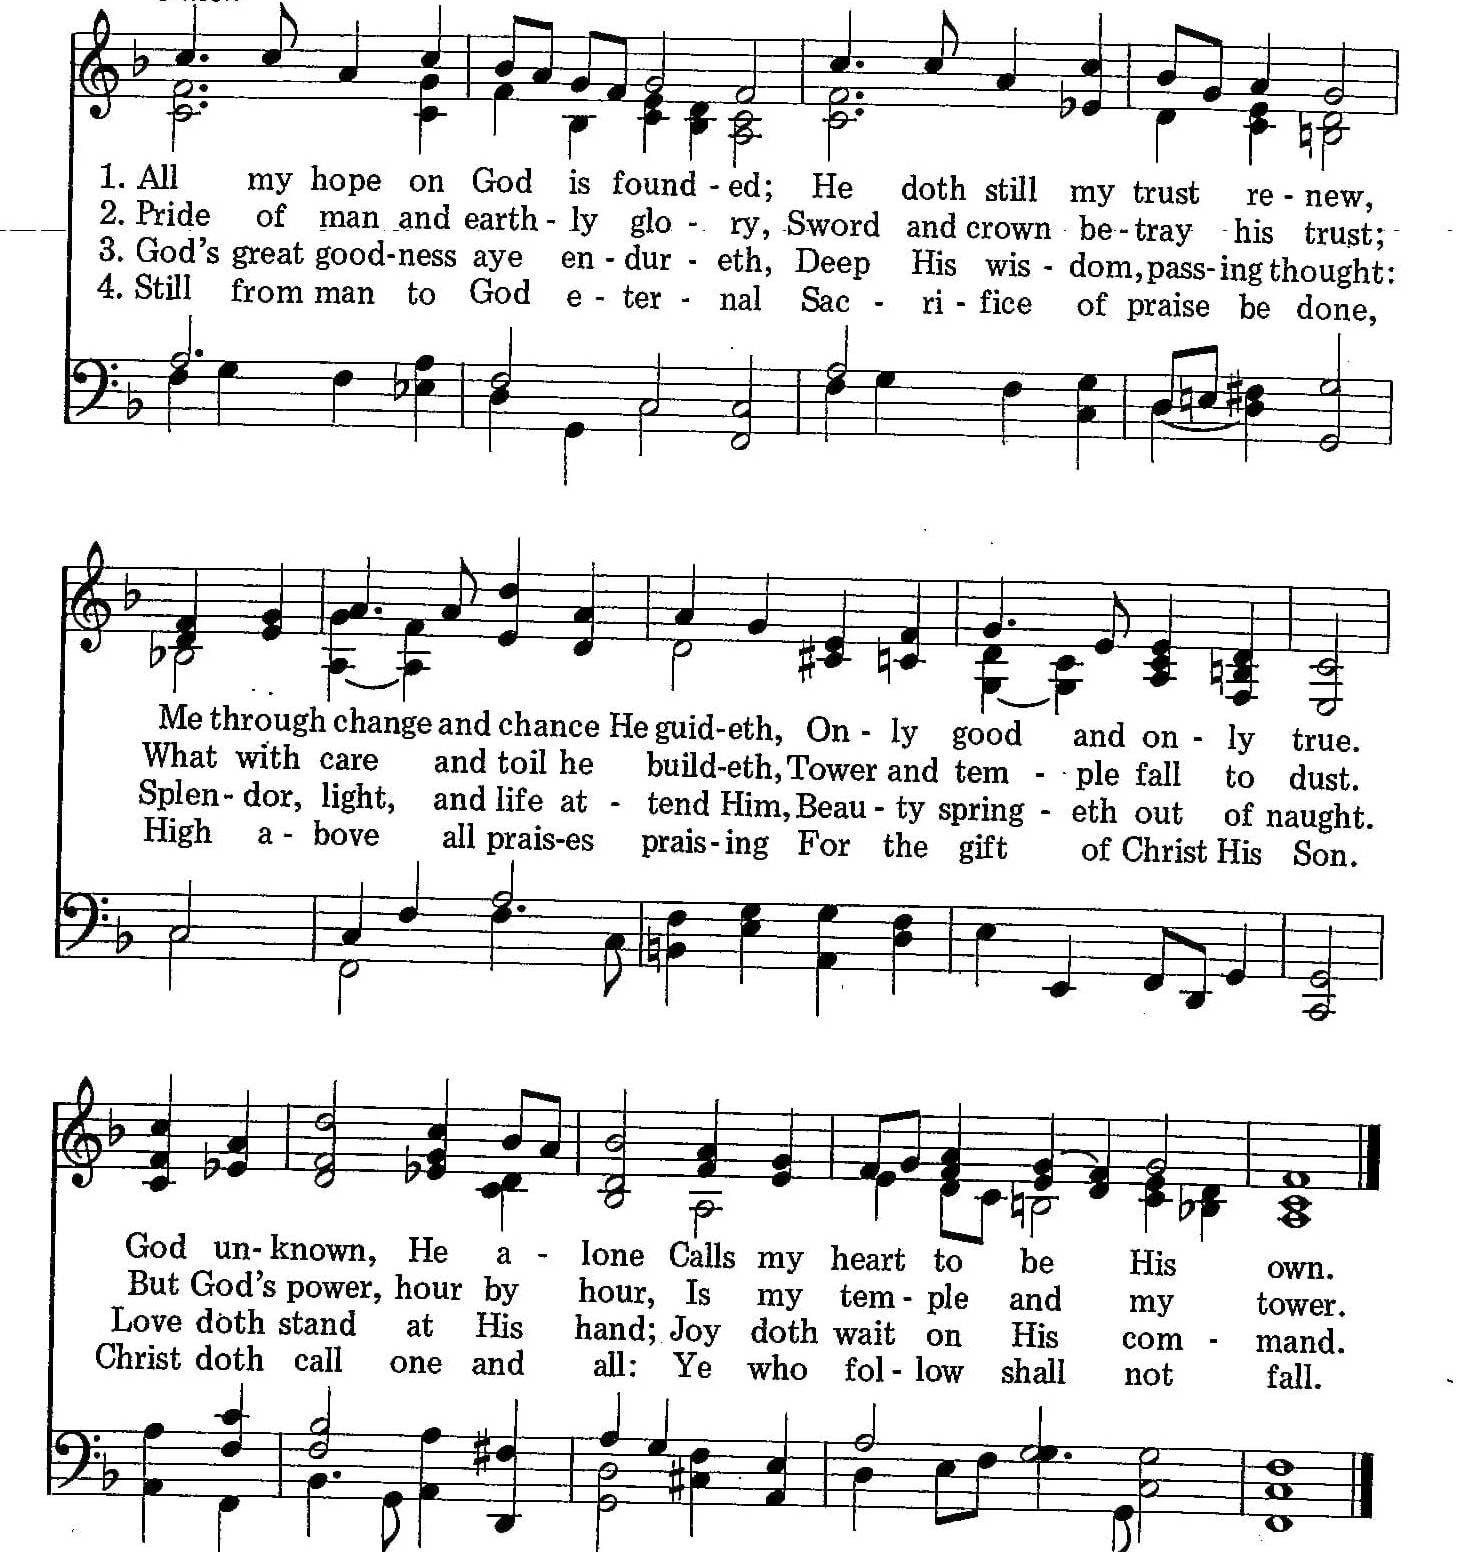 005 – All My Hope on God Is Founded sheet music